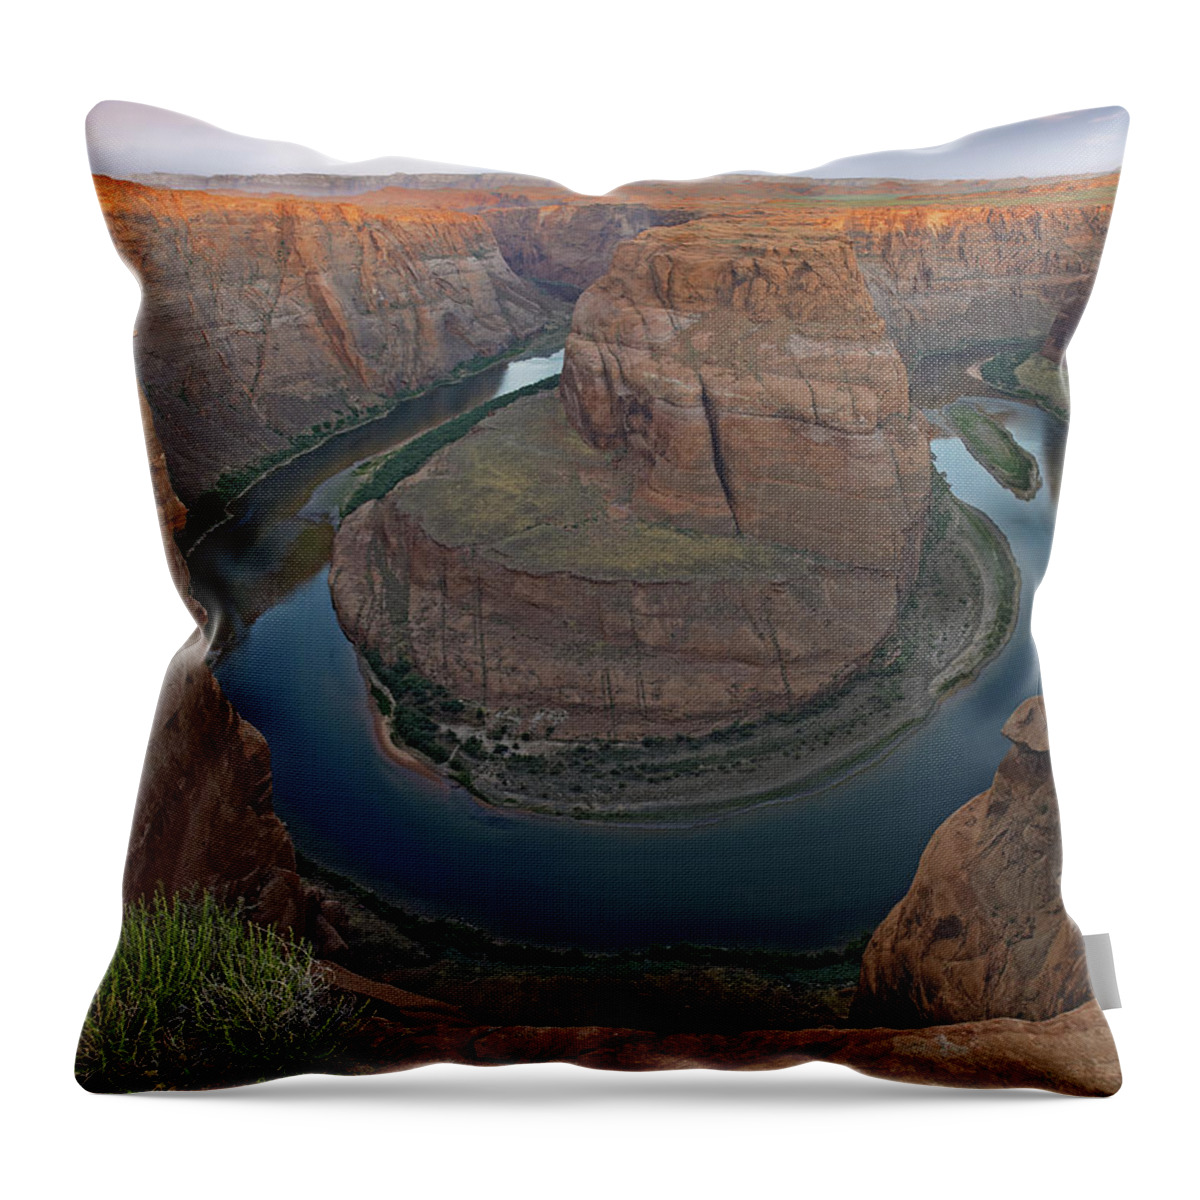 Feb0514 Throw Pillow featuring the photograph Colorado River At Horseshoe Bend #1 by Tim Fitzharris